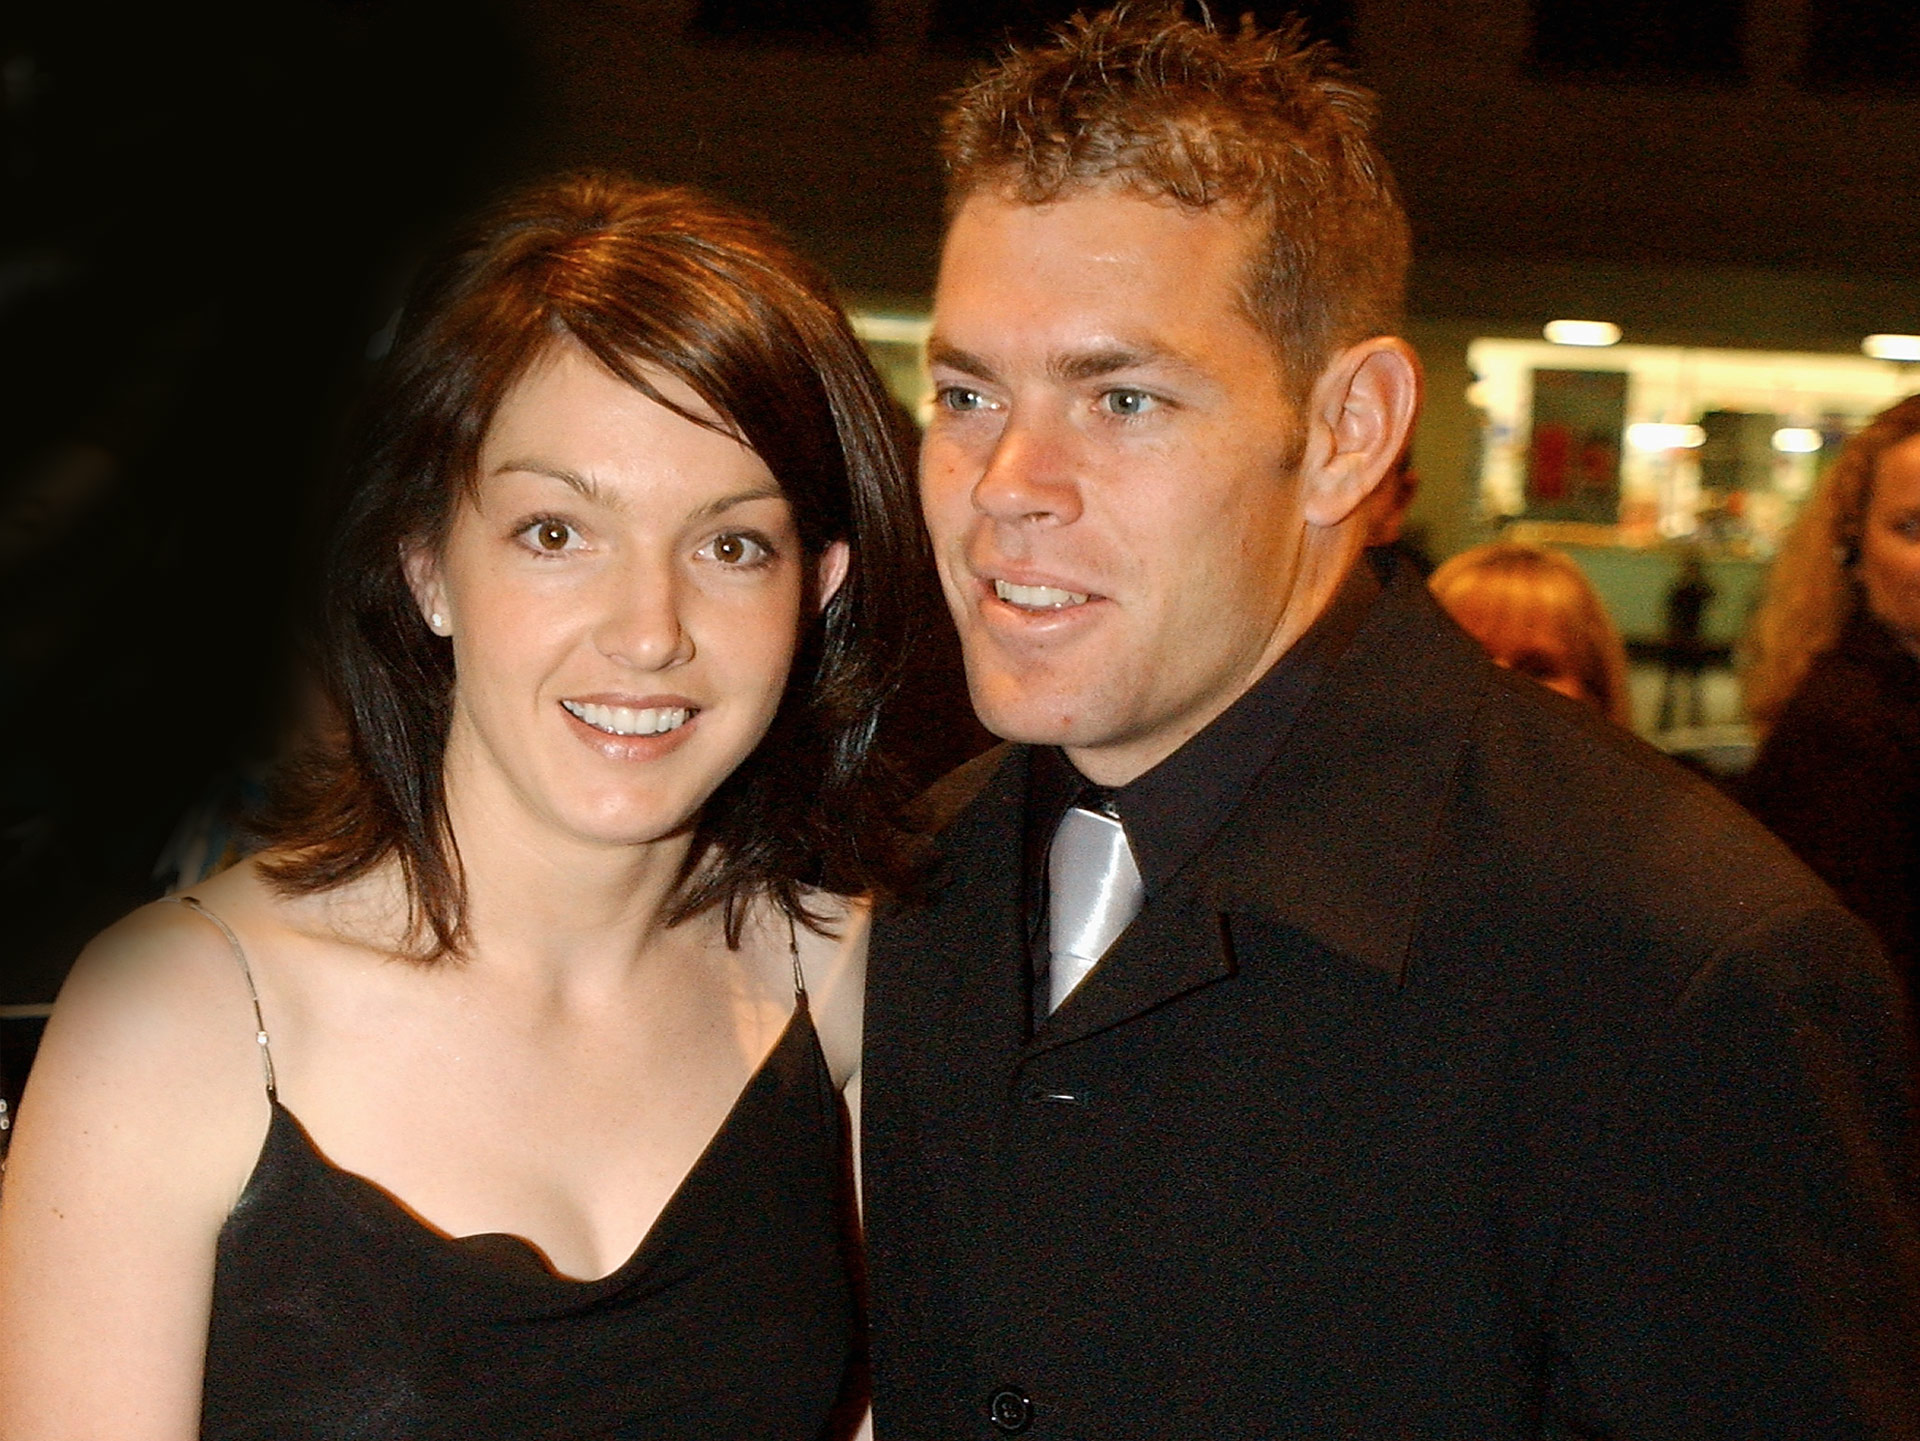 Brett Kimmorley’s wife Sharnie loses her battle to brain cancer